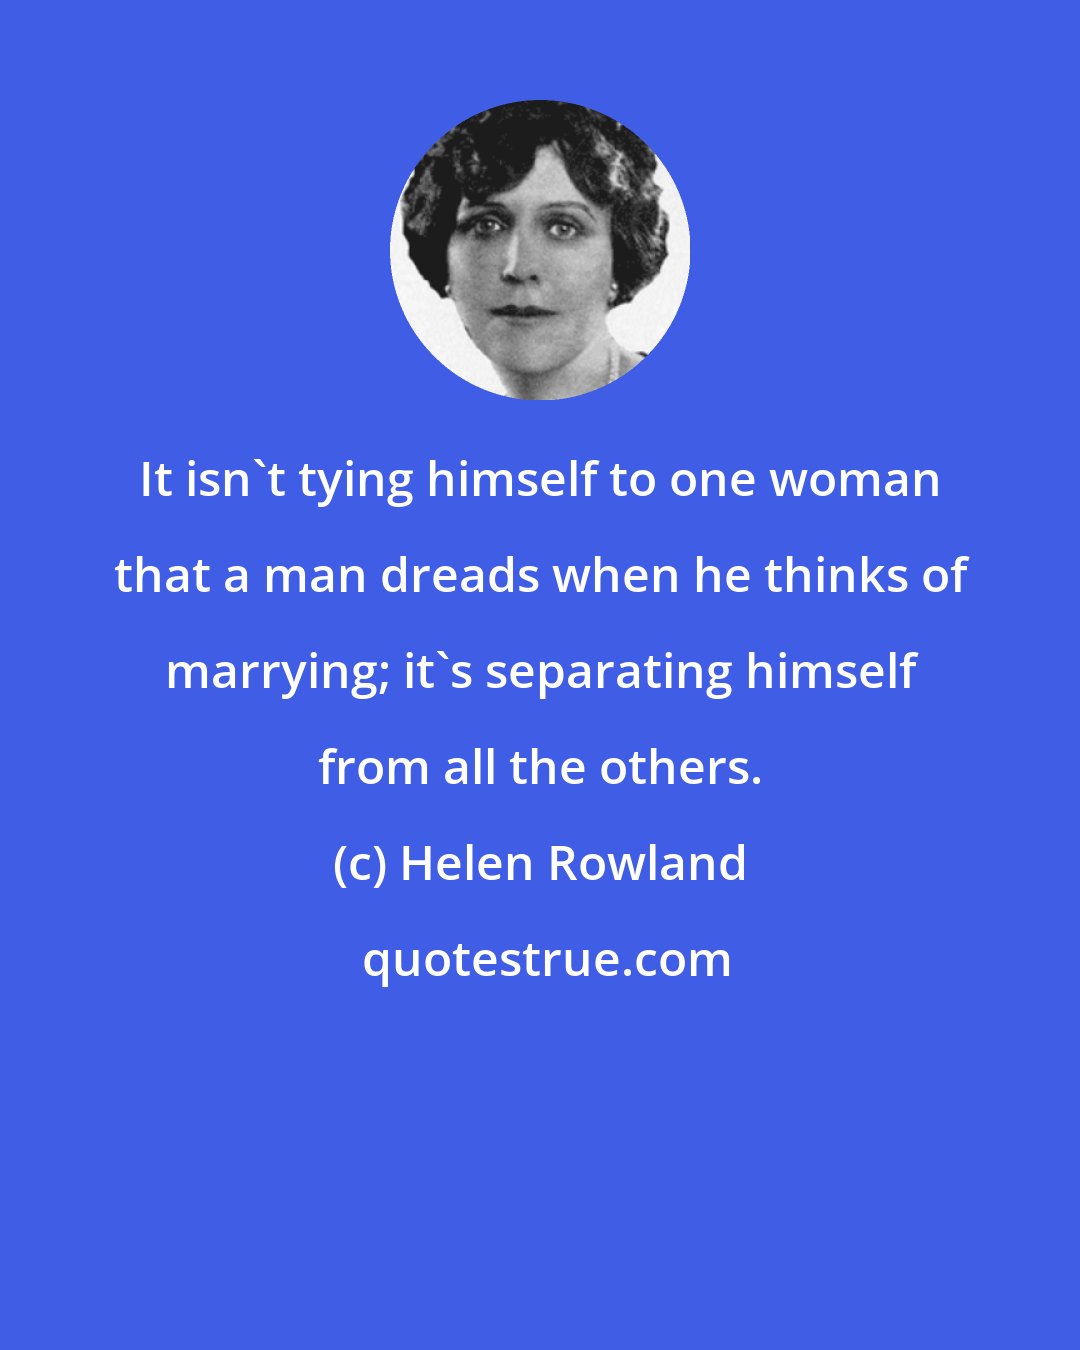 Helen Rowland: It isn't tying himself to one woman that a man dreads when he thinks of marrying; it's separating himself from all the others.